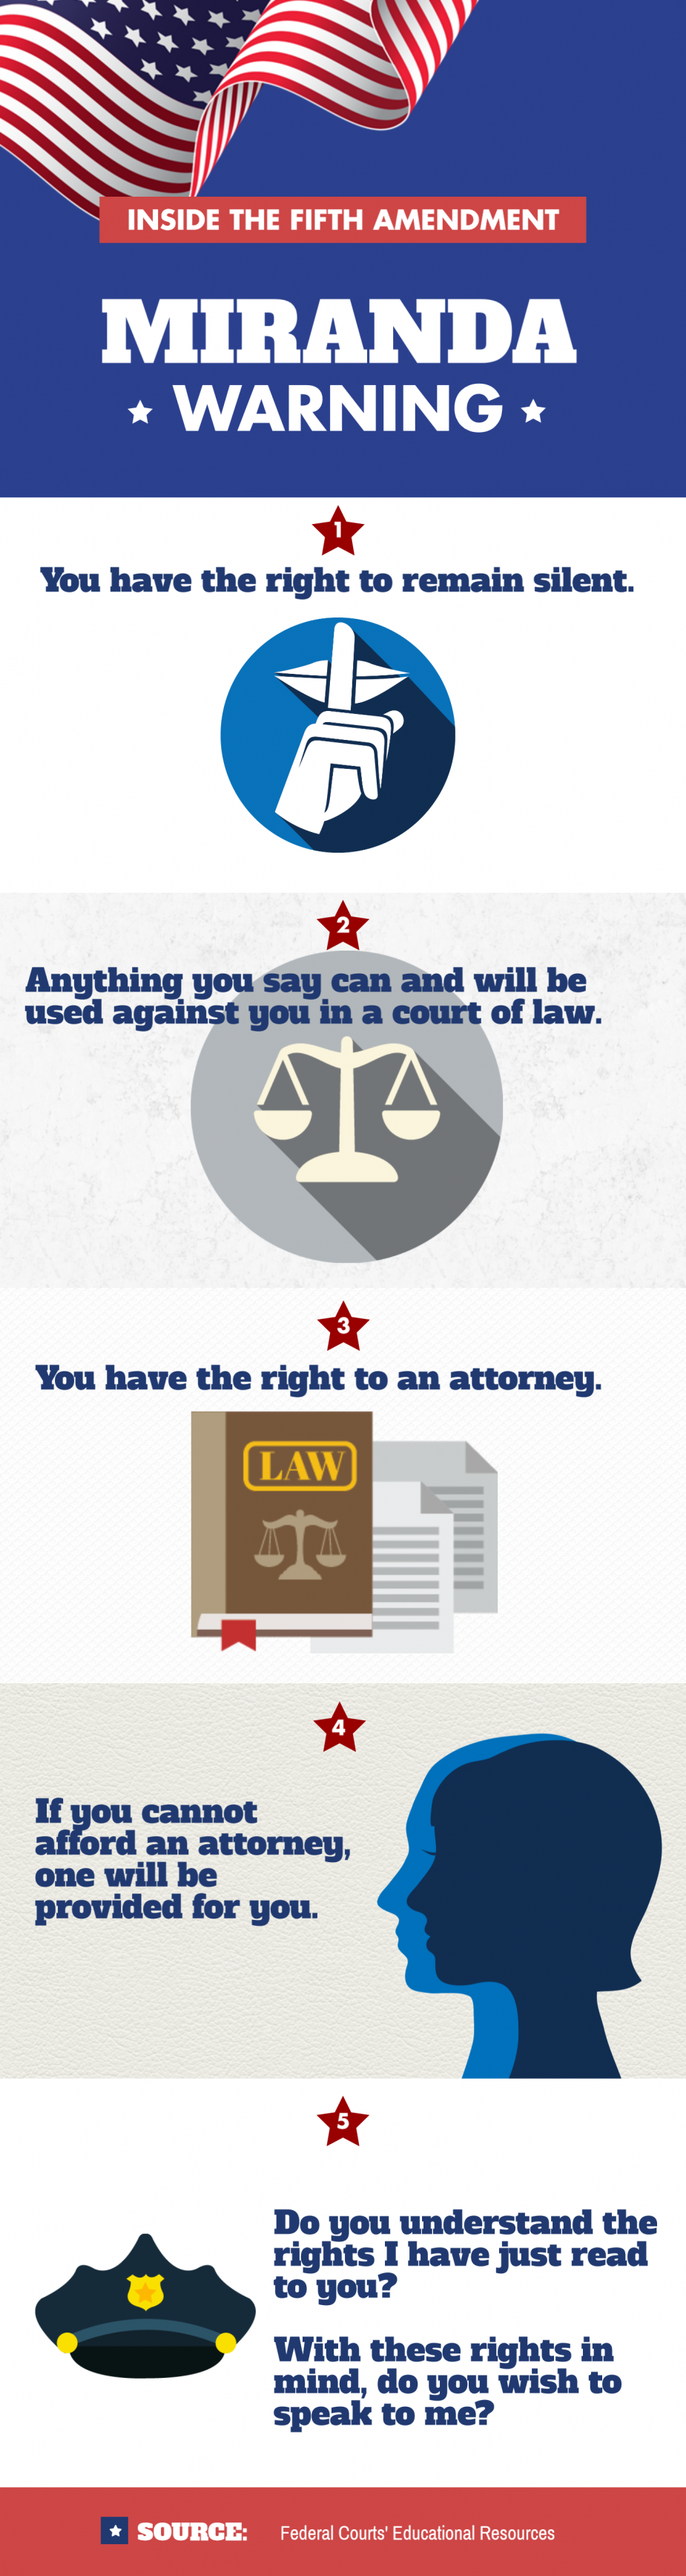 Infographic illustrating the five components of the Miranda Warning: You have the right to remain silent. Anything you say can and will be used against you in a court of law. You have the right to an attorney. If you cannot afford an attorney, one will be